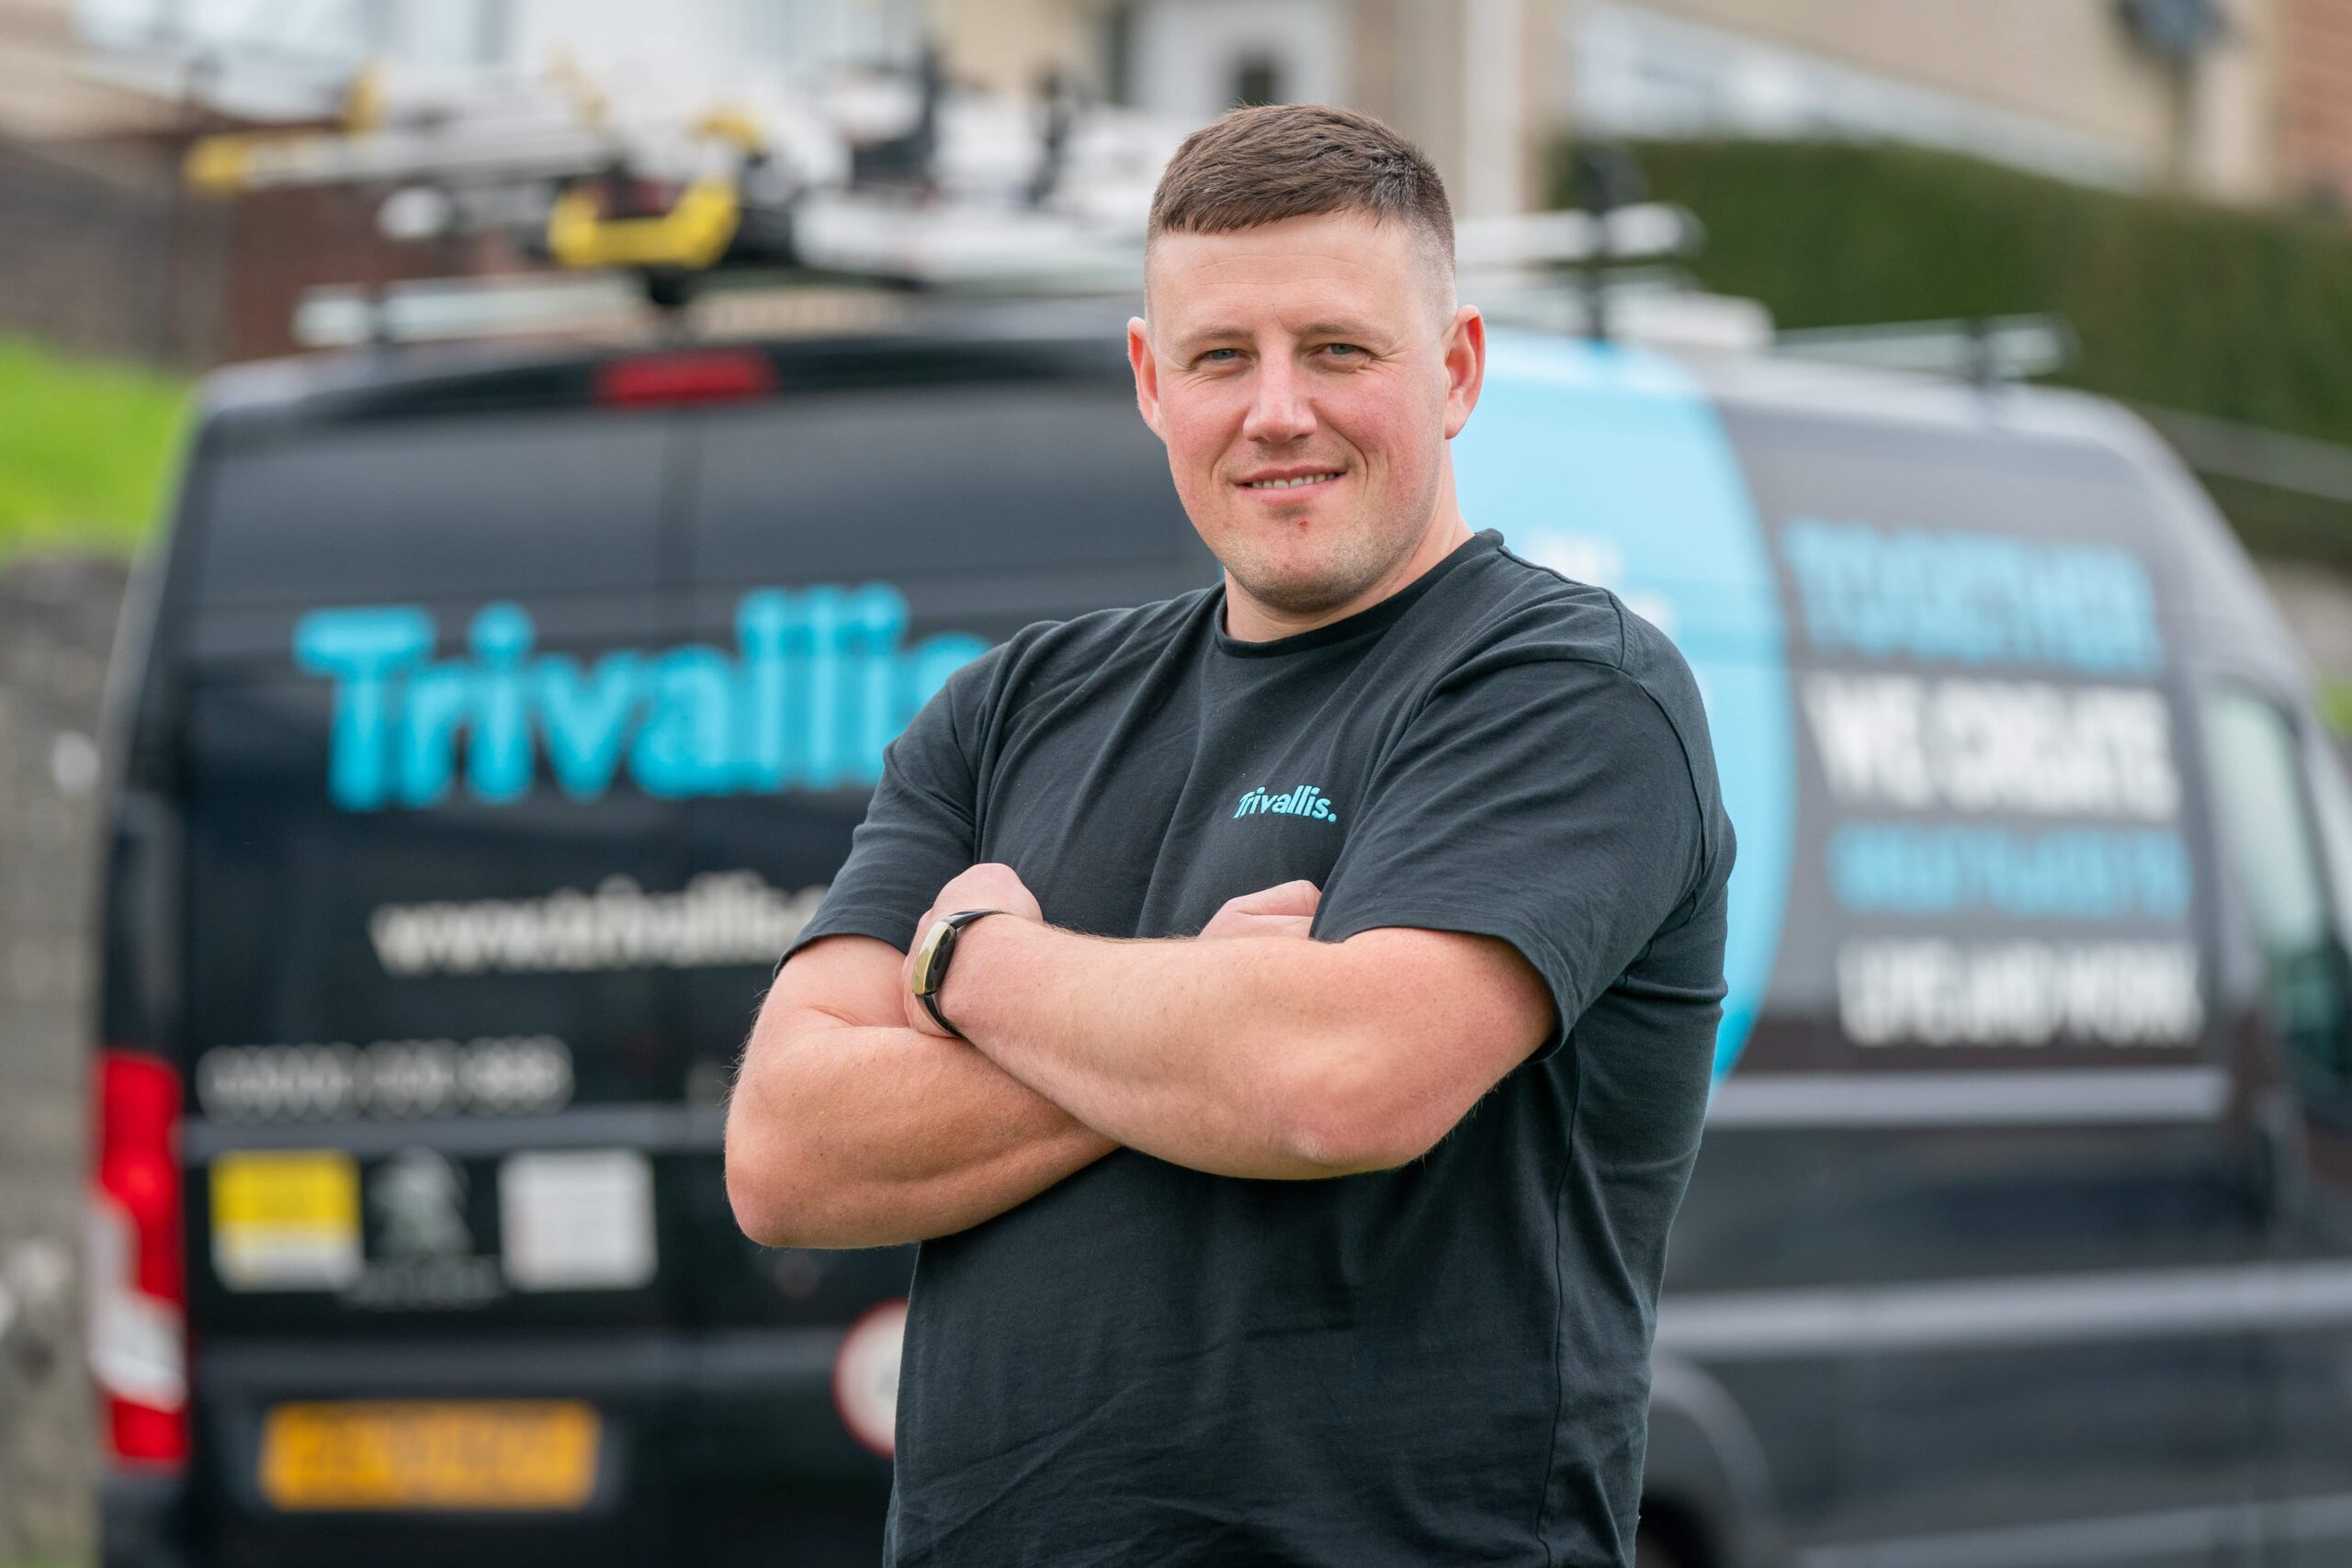 A man with crossed arms smiling in front of a service van with "trivallis" branding.